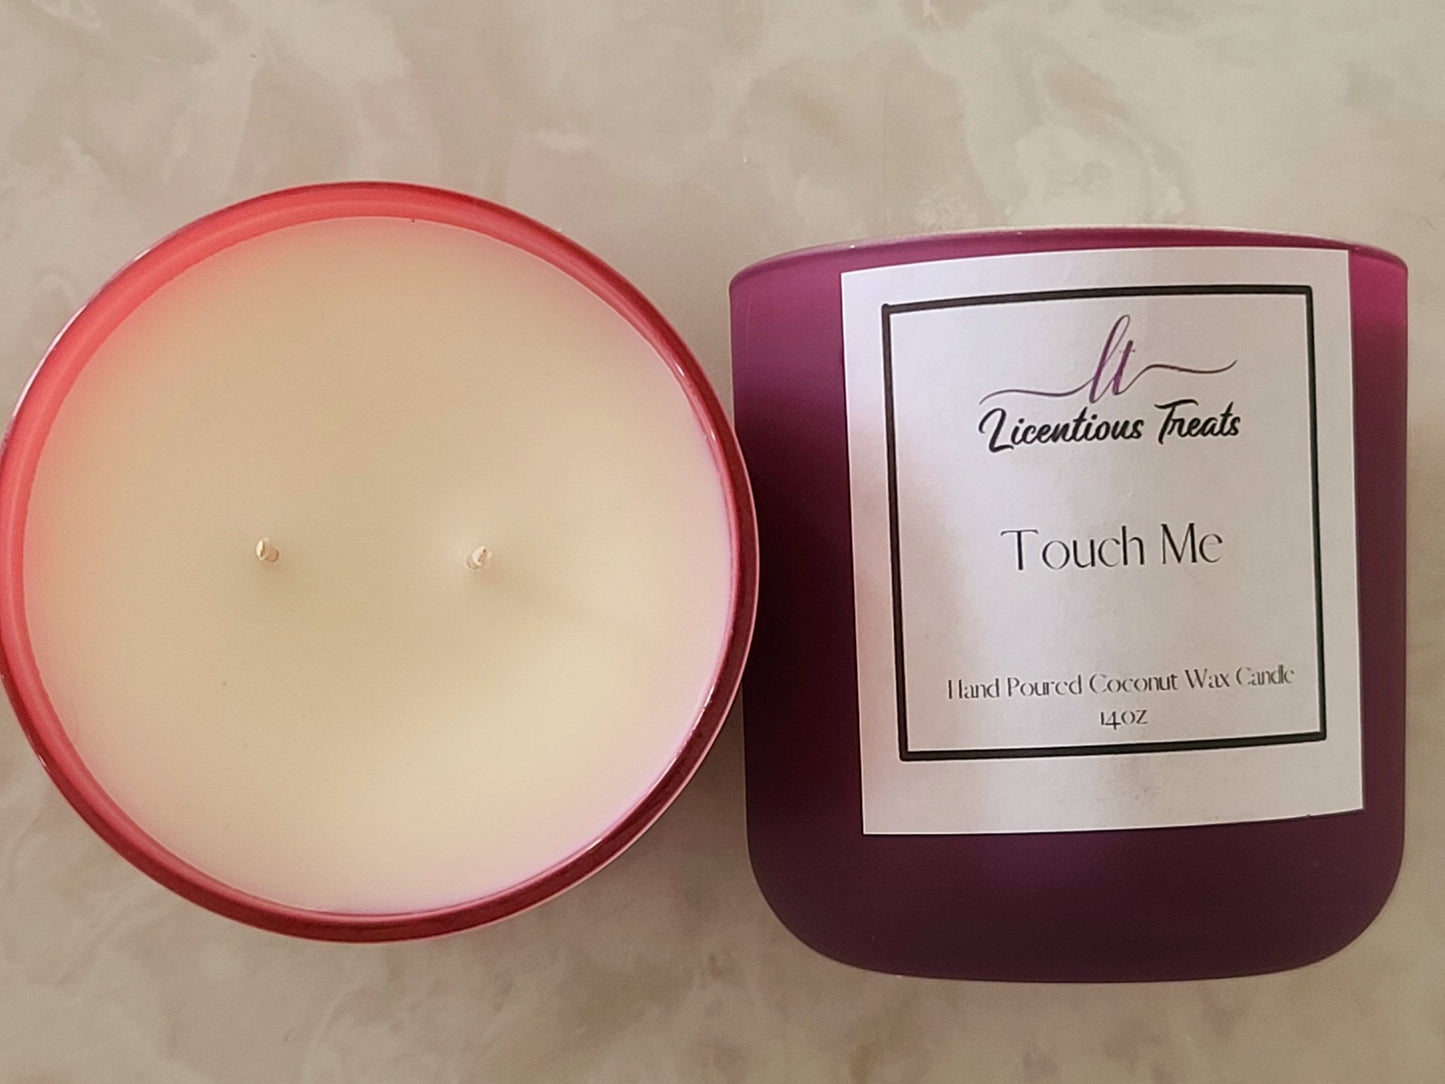 Candles - Touch Me 14oz - Licentious TreatsCandles - Touch Me 14oz